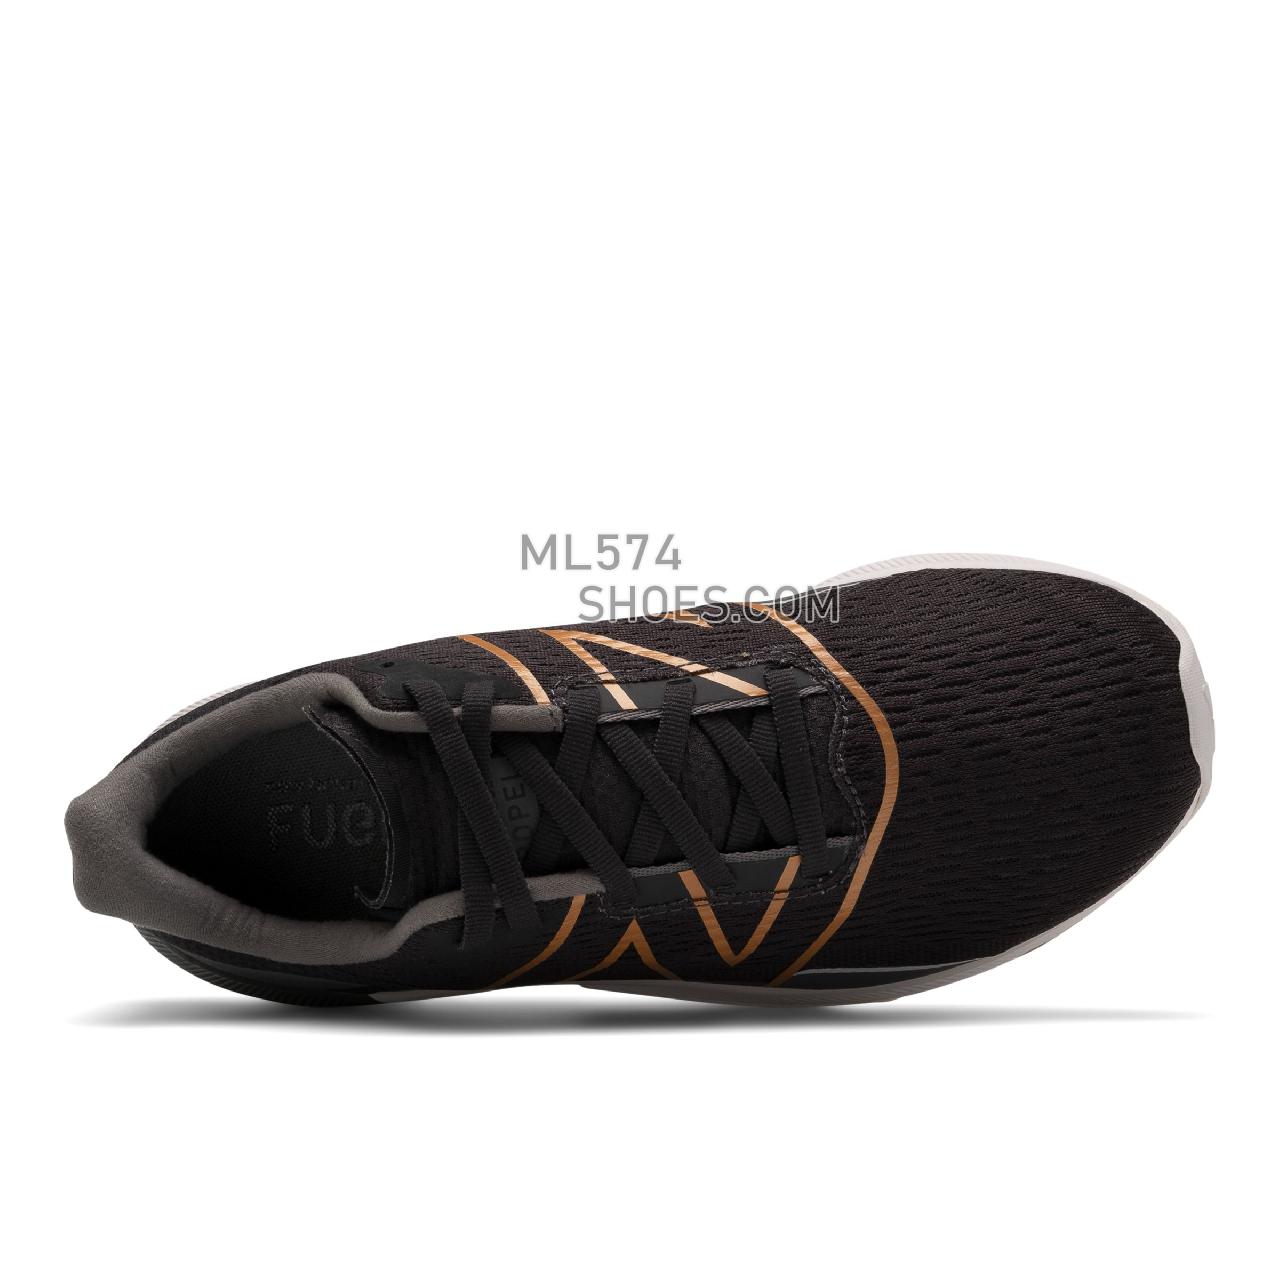 New Balance FuelCell Propel v2 - Women's Fuelcell Sleek And LightWeight - Phantom with Castlerock and Copper Metallic - WFCPRCG2